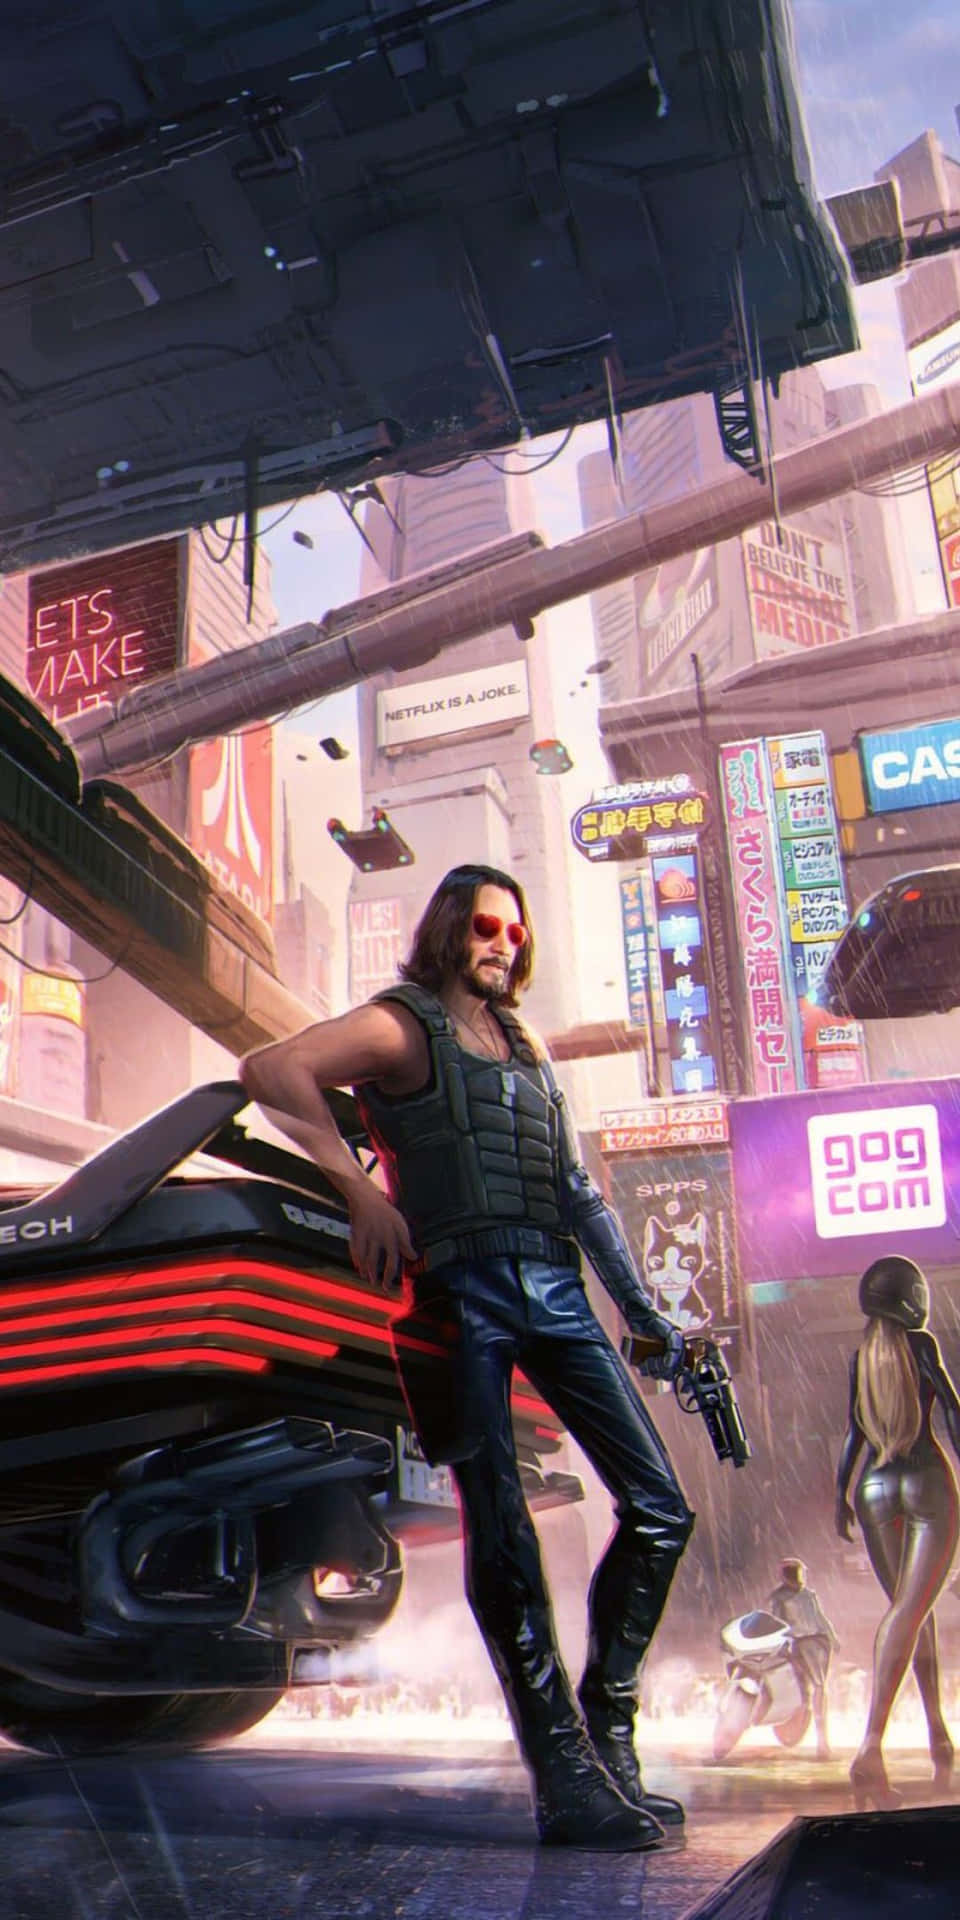 Ready for the future? Cyberpunk 2077 meets Pixel 3